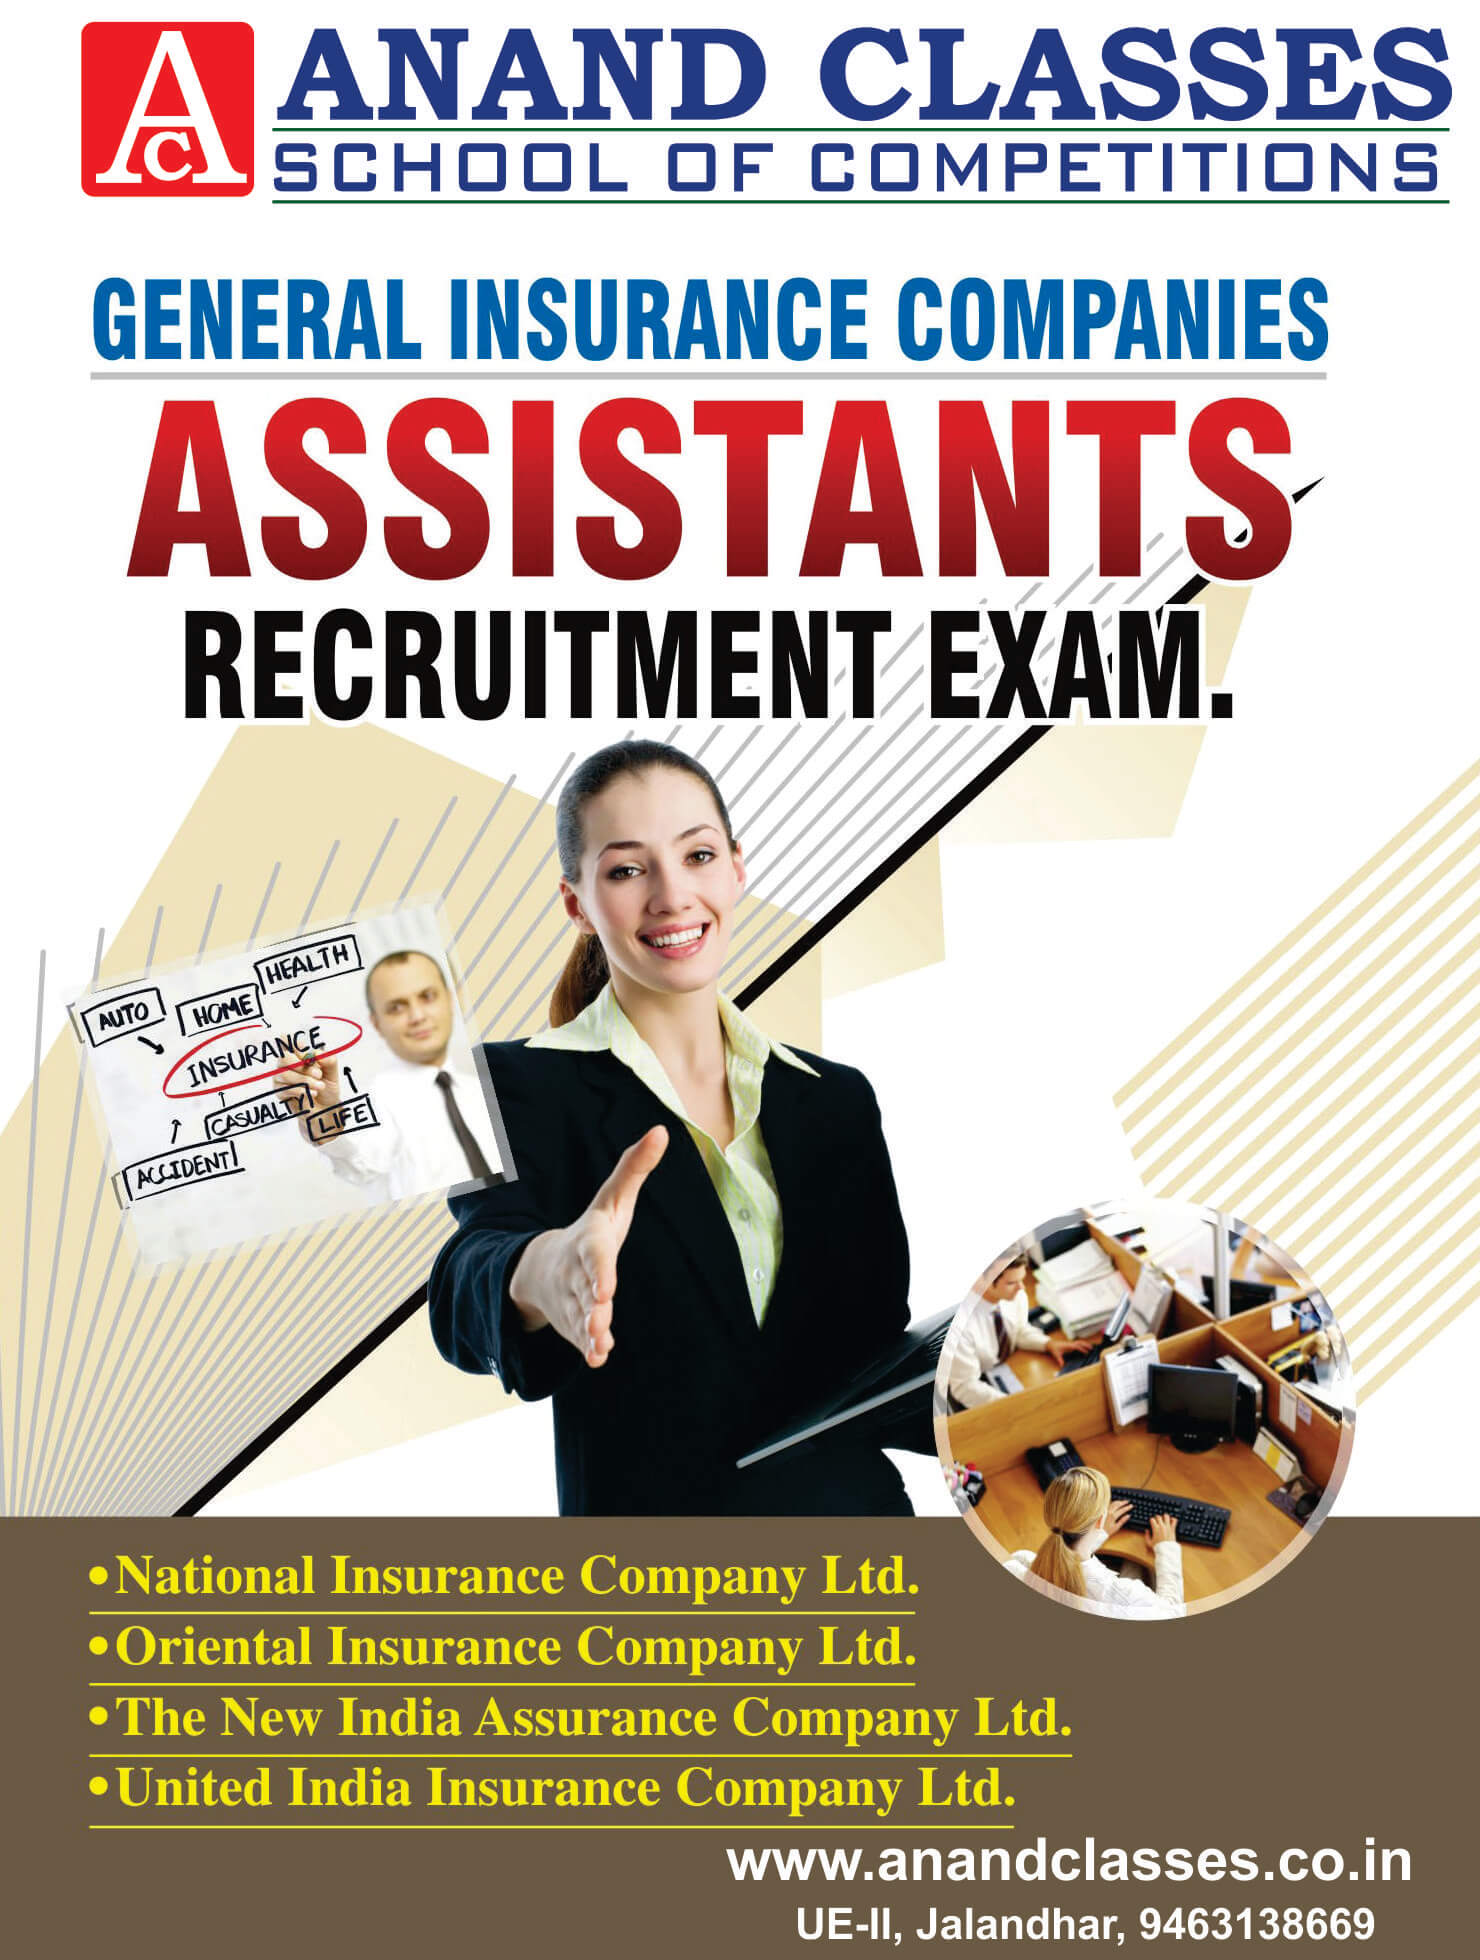 General Insurance Companies GIC Assistants Exam Coaching Center In Jalandhar Neeraj Anand Classes